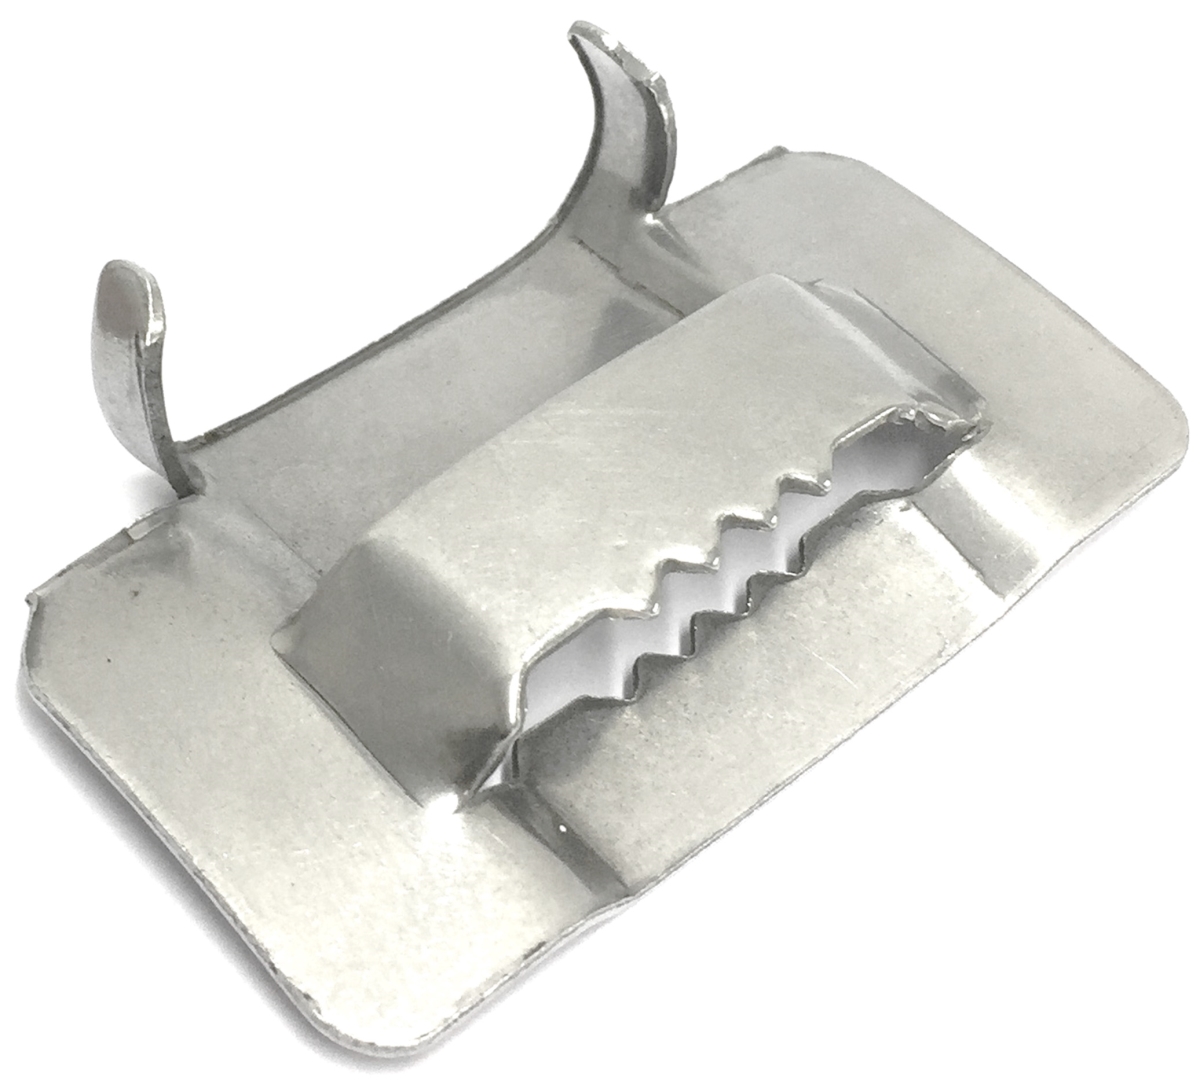 Picture of Fechometal USA FDT9231720NFMT  1 1-4 inch 201 Stainless Steel Ear-Lokt Buckles 25 Pieces 